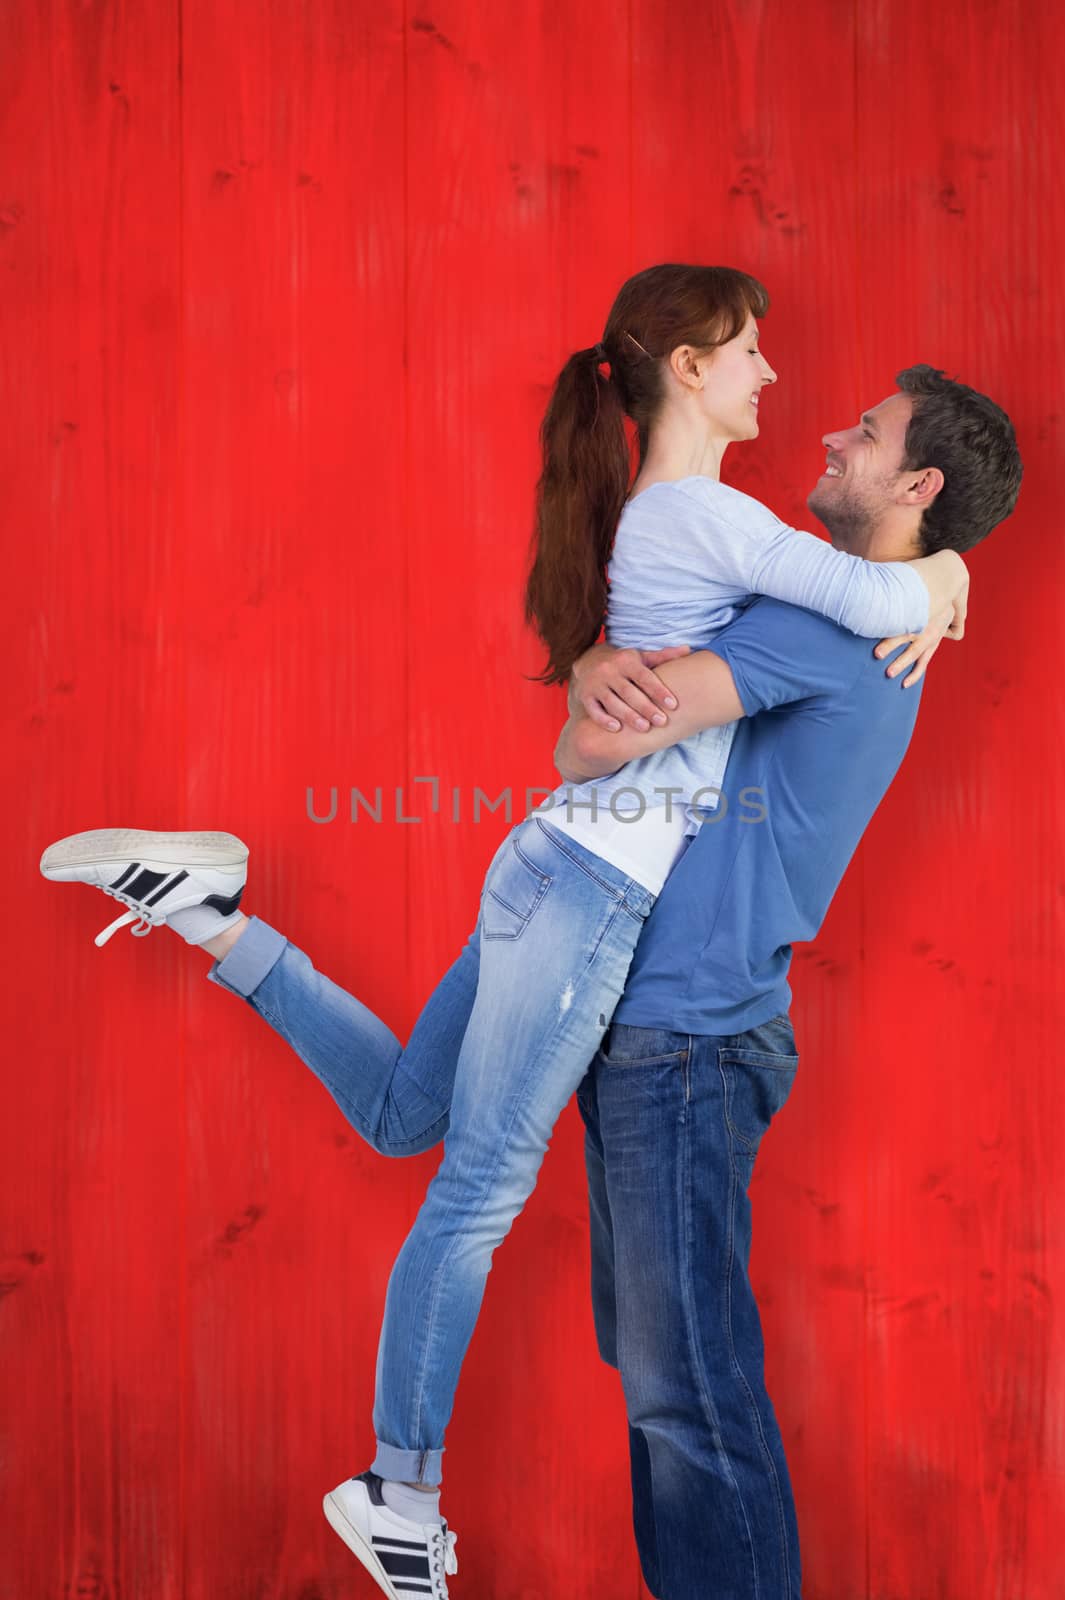 Couple hugging each other against red wooden planks